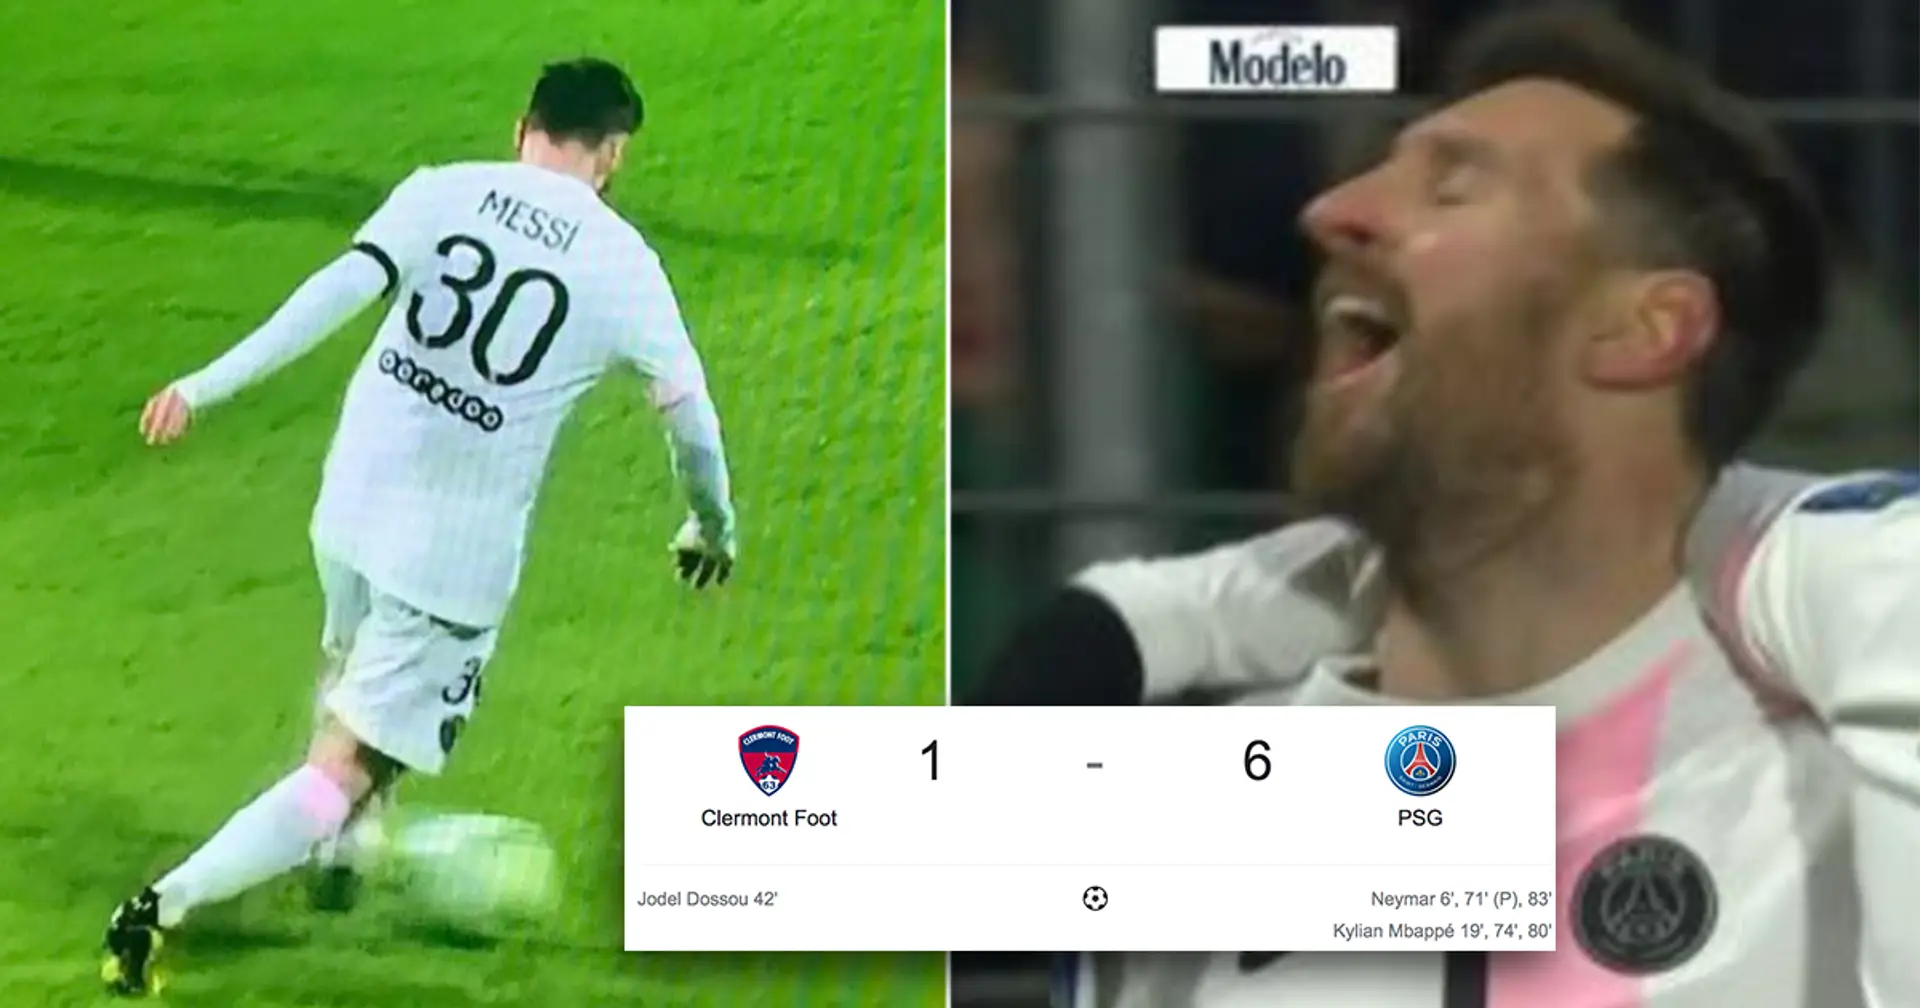 Messi gets 3 assists in one game for PSG, breaks historic Ligue 1 record